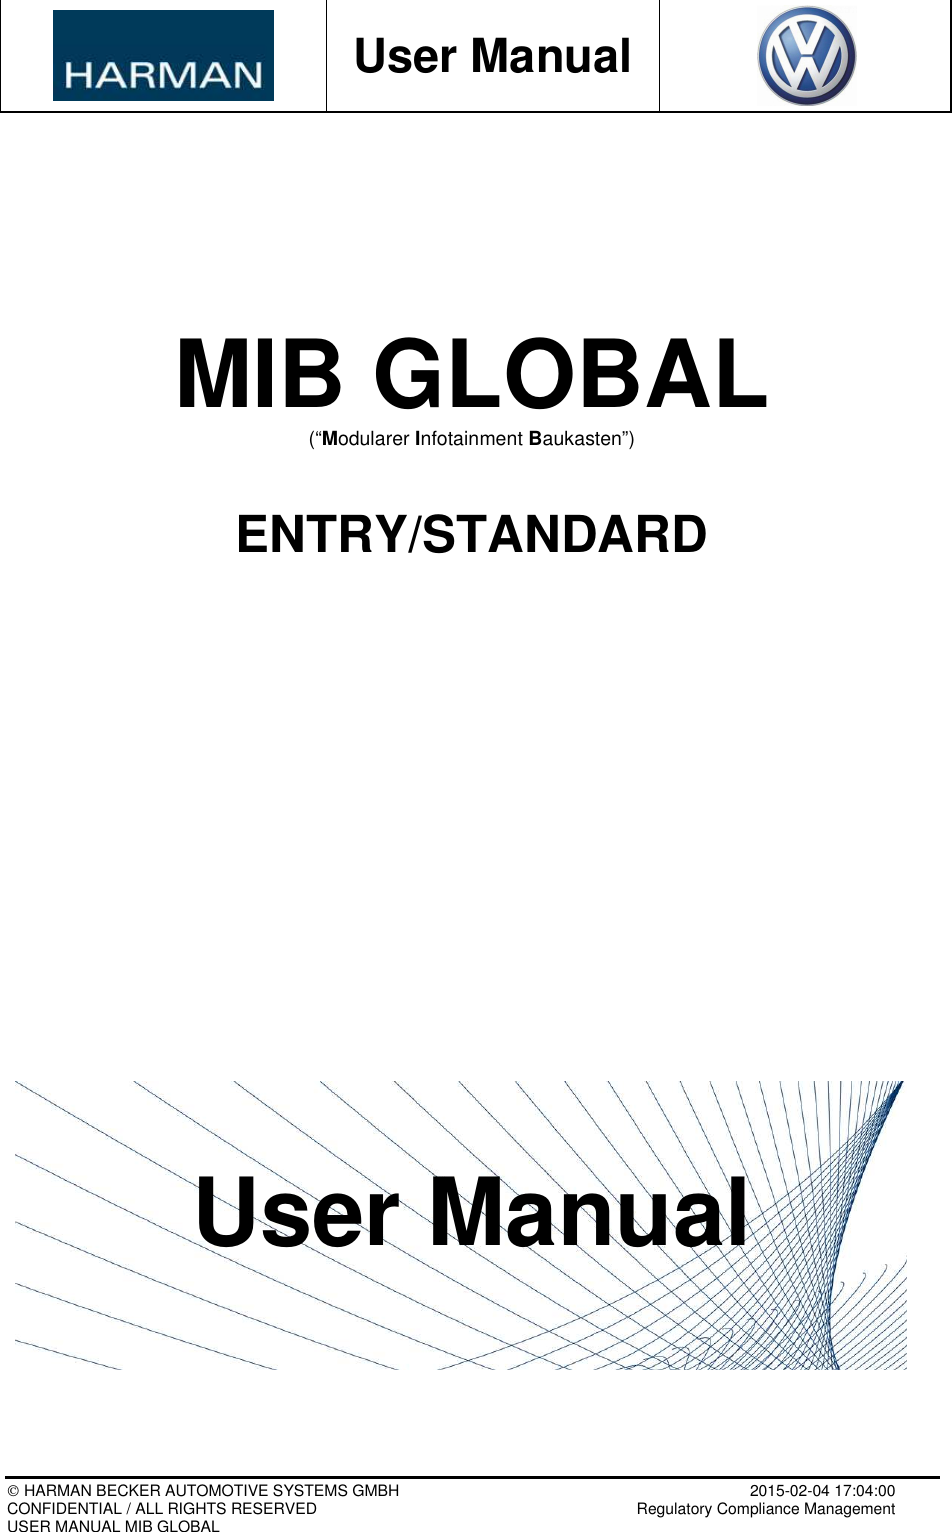           User Manual    HARMAN BECKER AUTOMOTIVE SYSTEMS GMBH    2015-02-04 17:04:00 CONFIDENTIAL / ALL RIGHTS RESERVED     Regulatory Compliance Management USER MANUAL MIB GLOBAL     MIB GLOBAL (“Modularer Infotainment Baukasten”)   ENTRY/STANDARD                       User Manual      